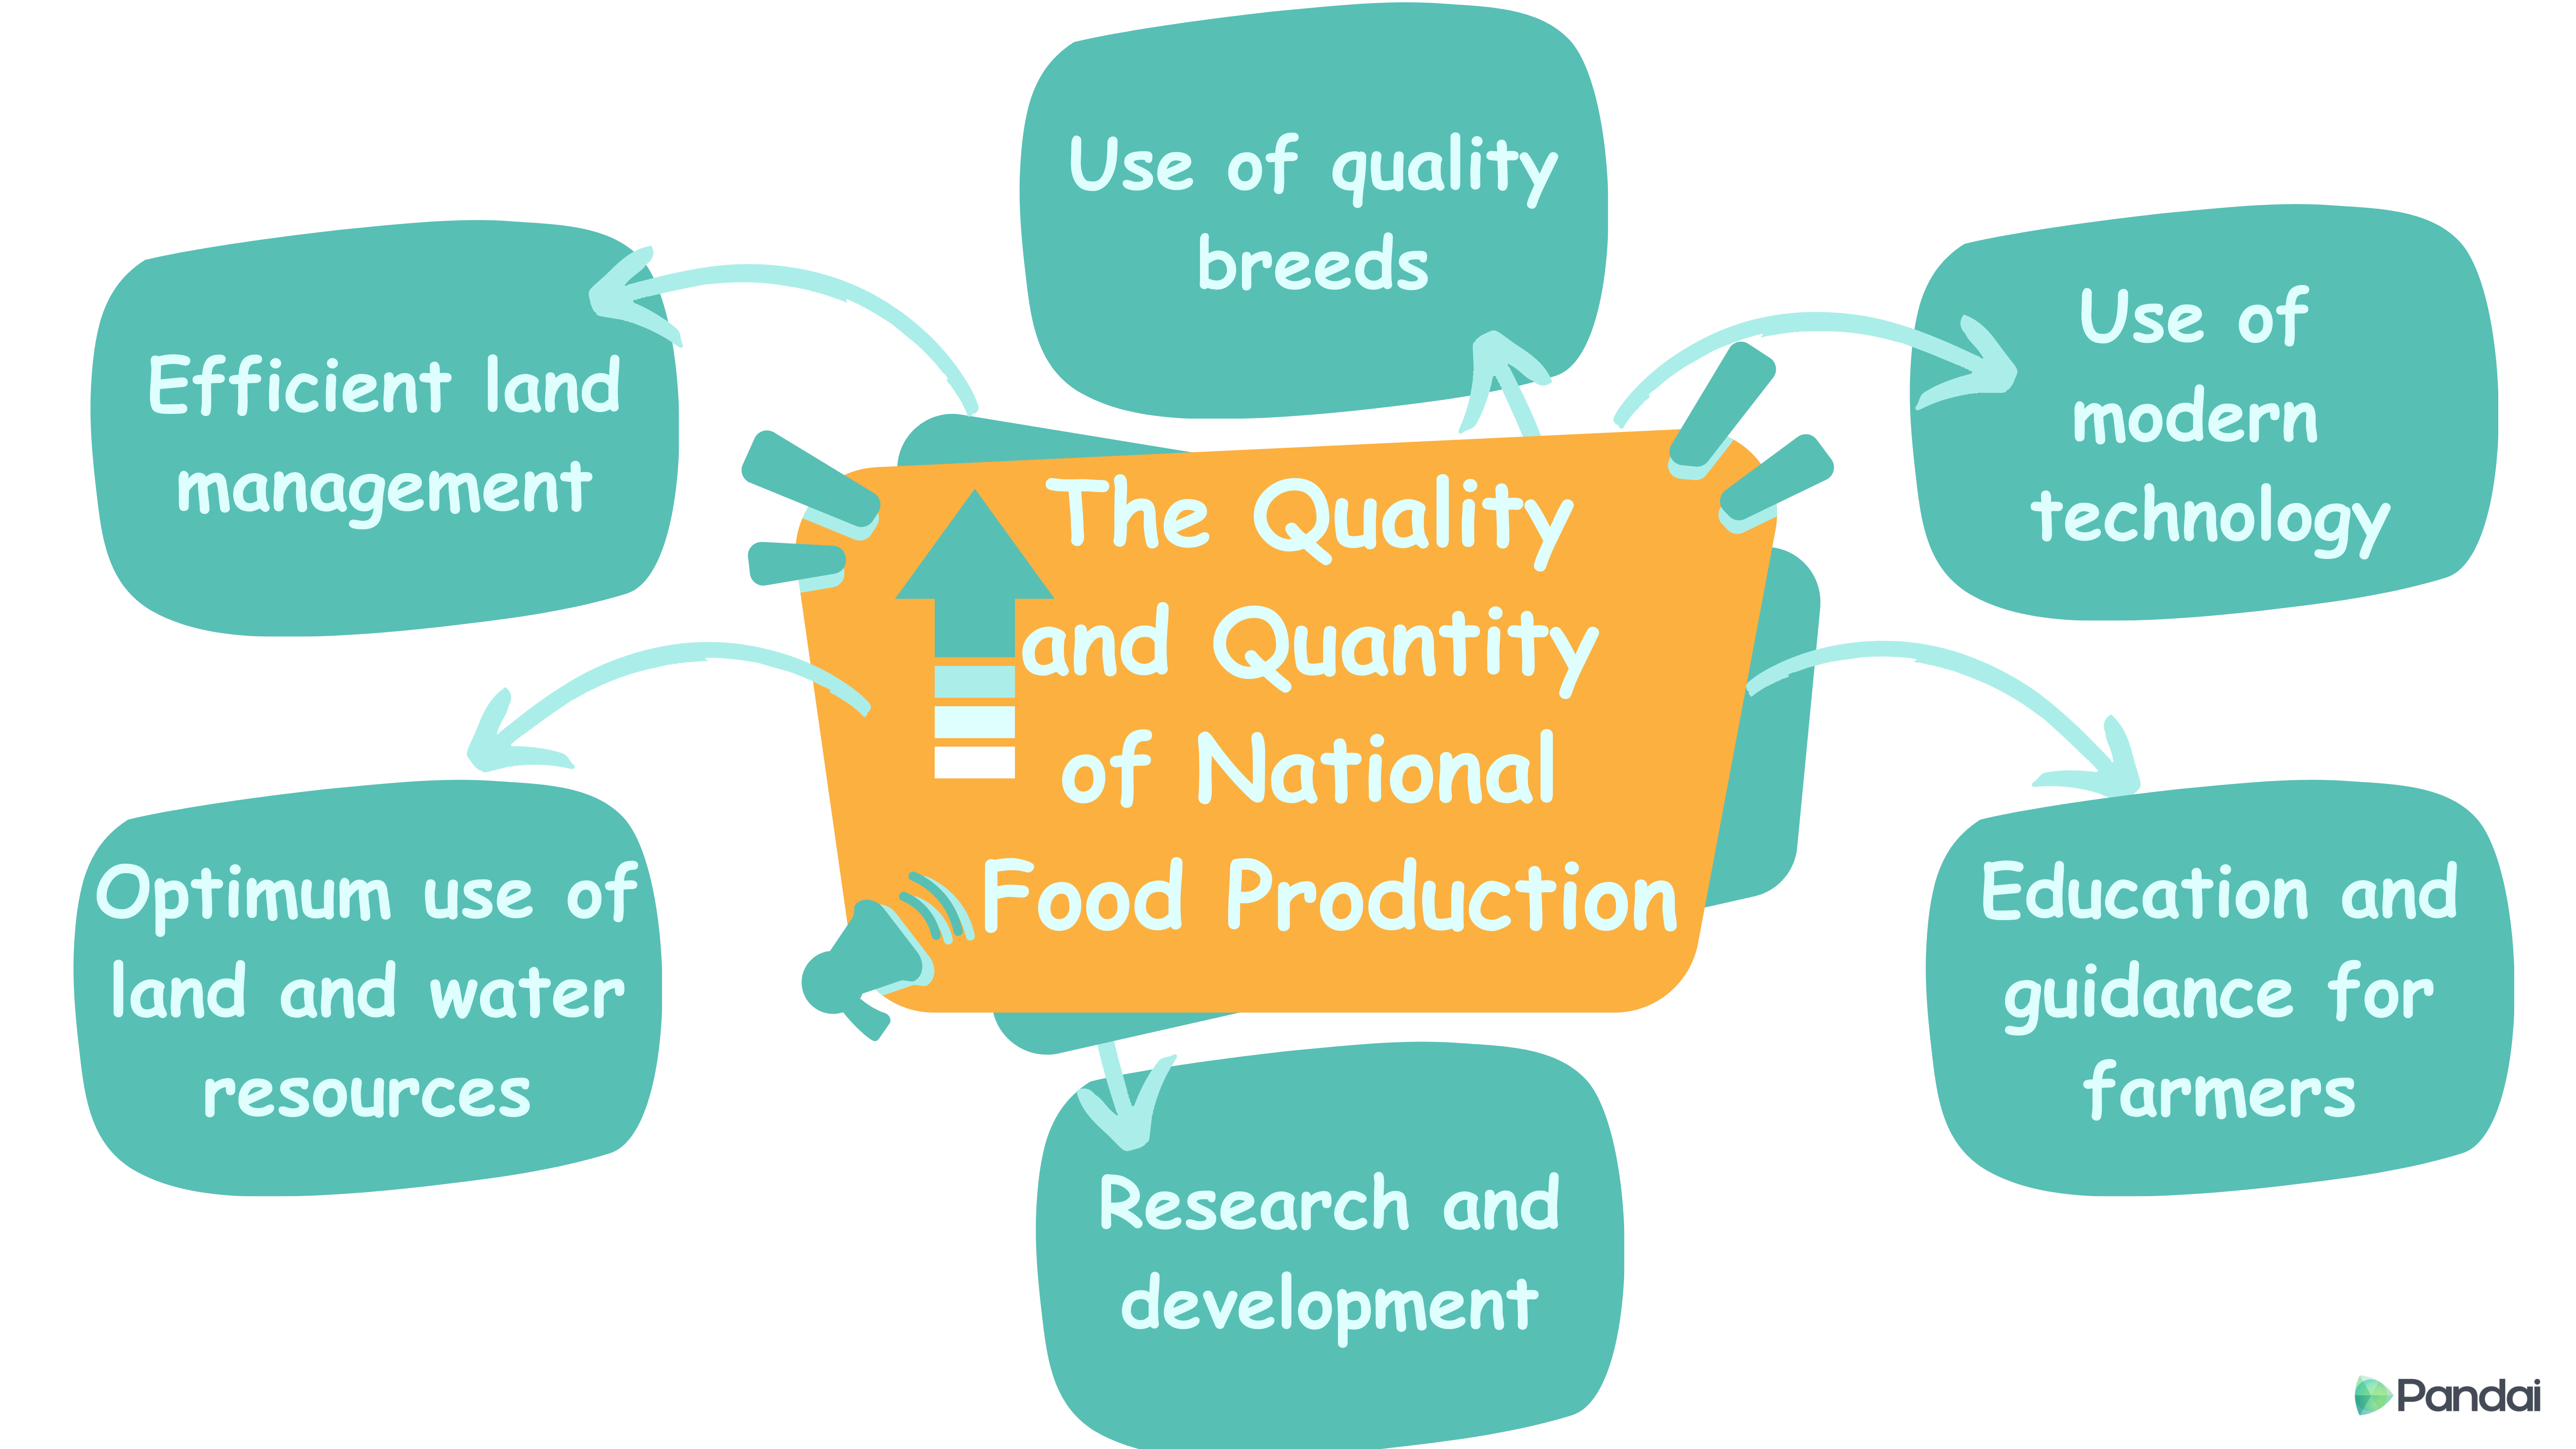 The Quality and Quantity of National Food Production